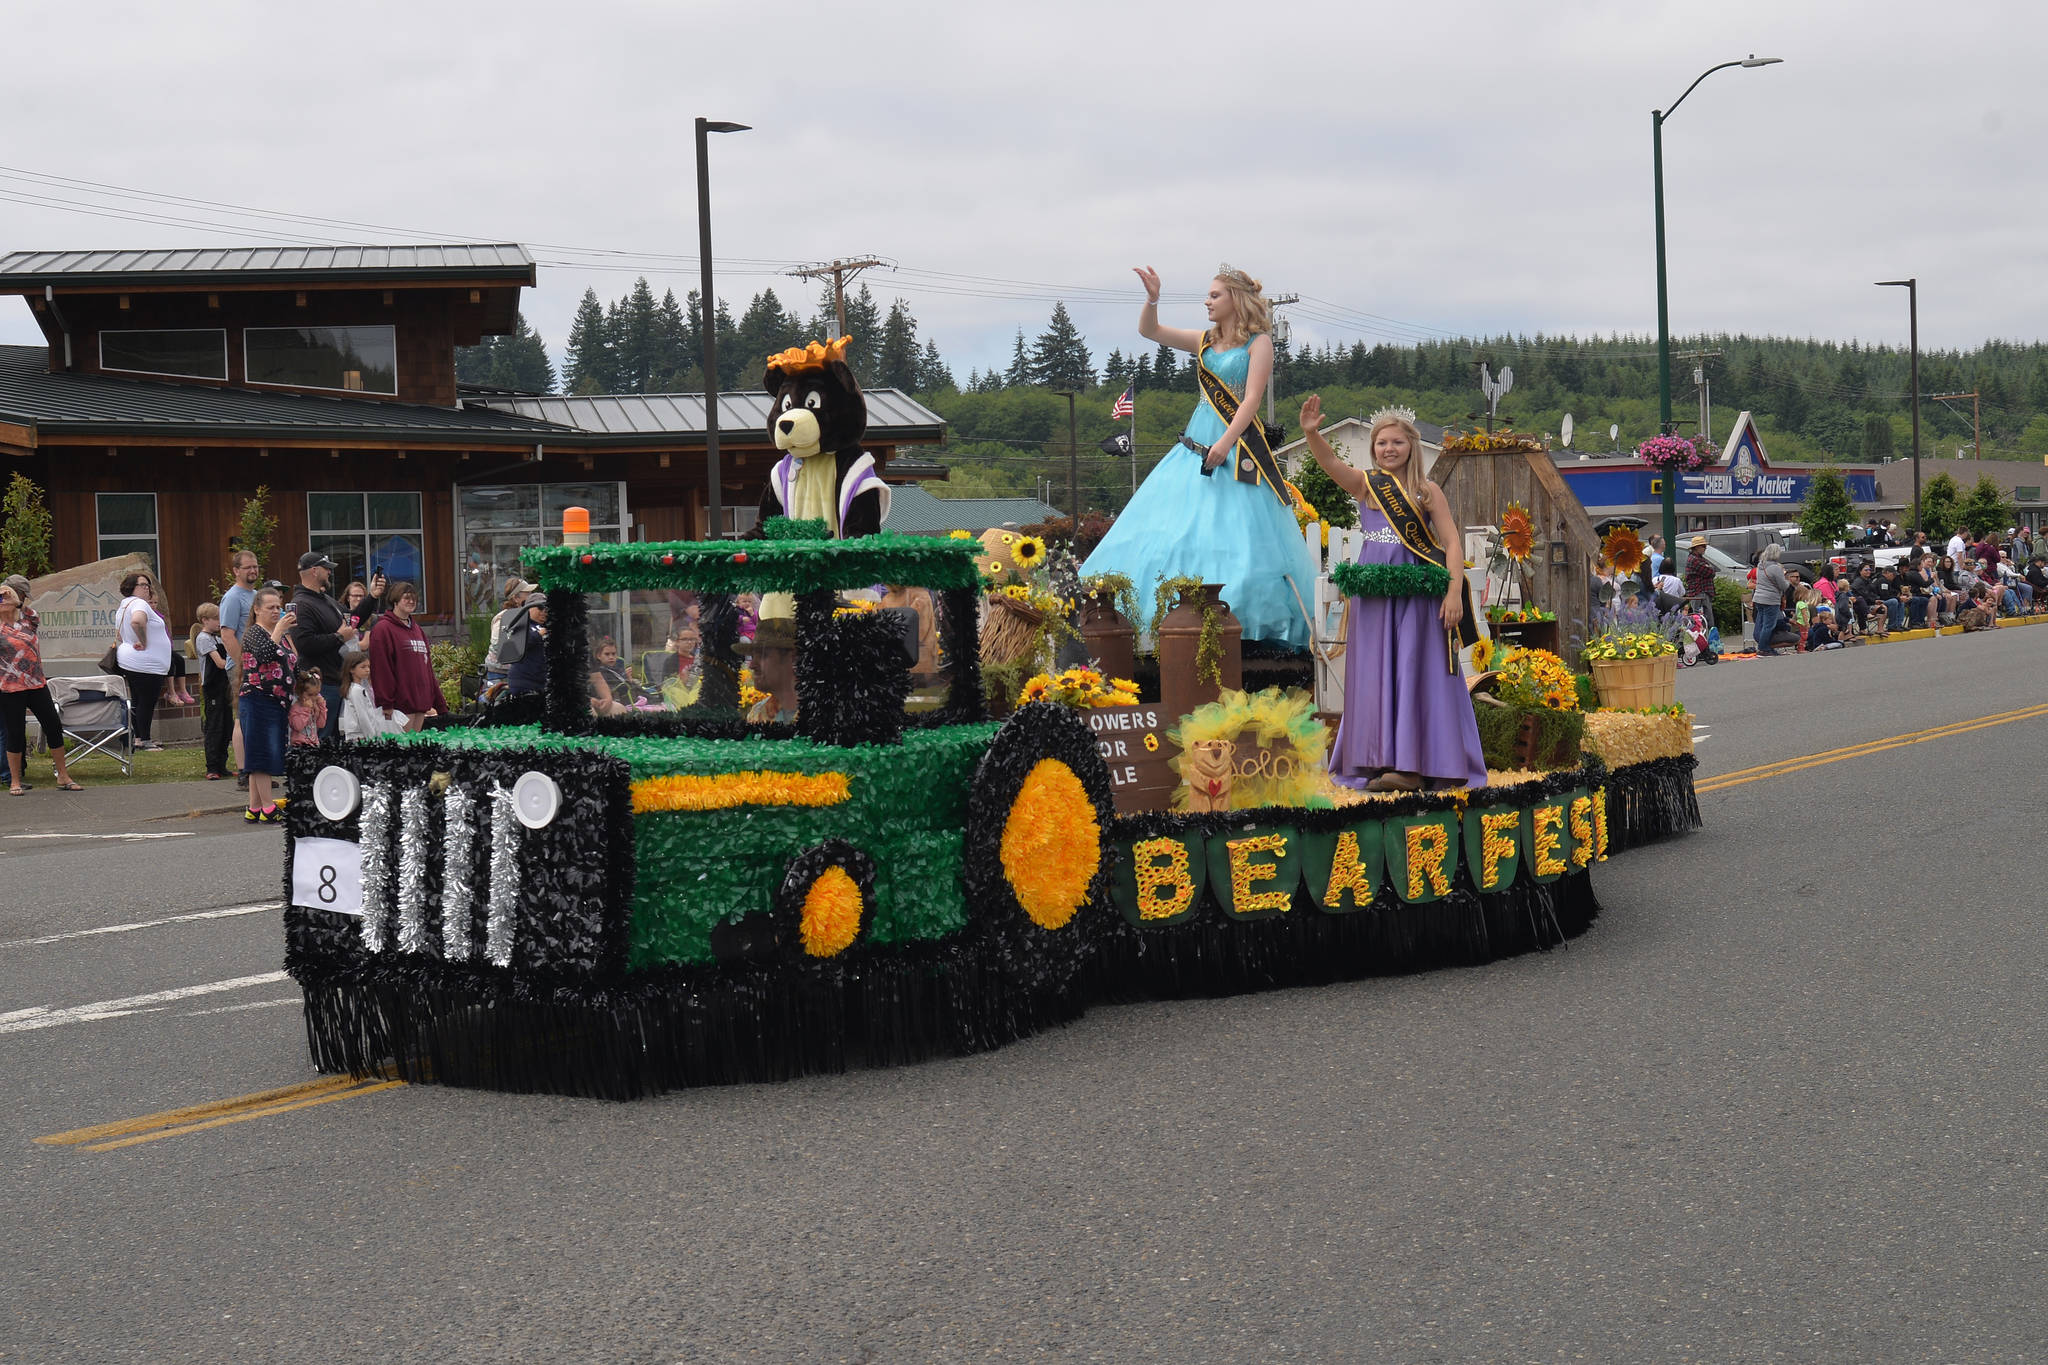 DAVE HAVILAND | THE DAILY WORLD 
McCleary Bear Festival royalty at the 62nd Annual Grand Parade.